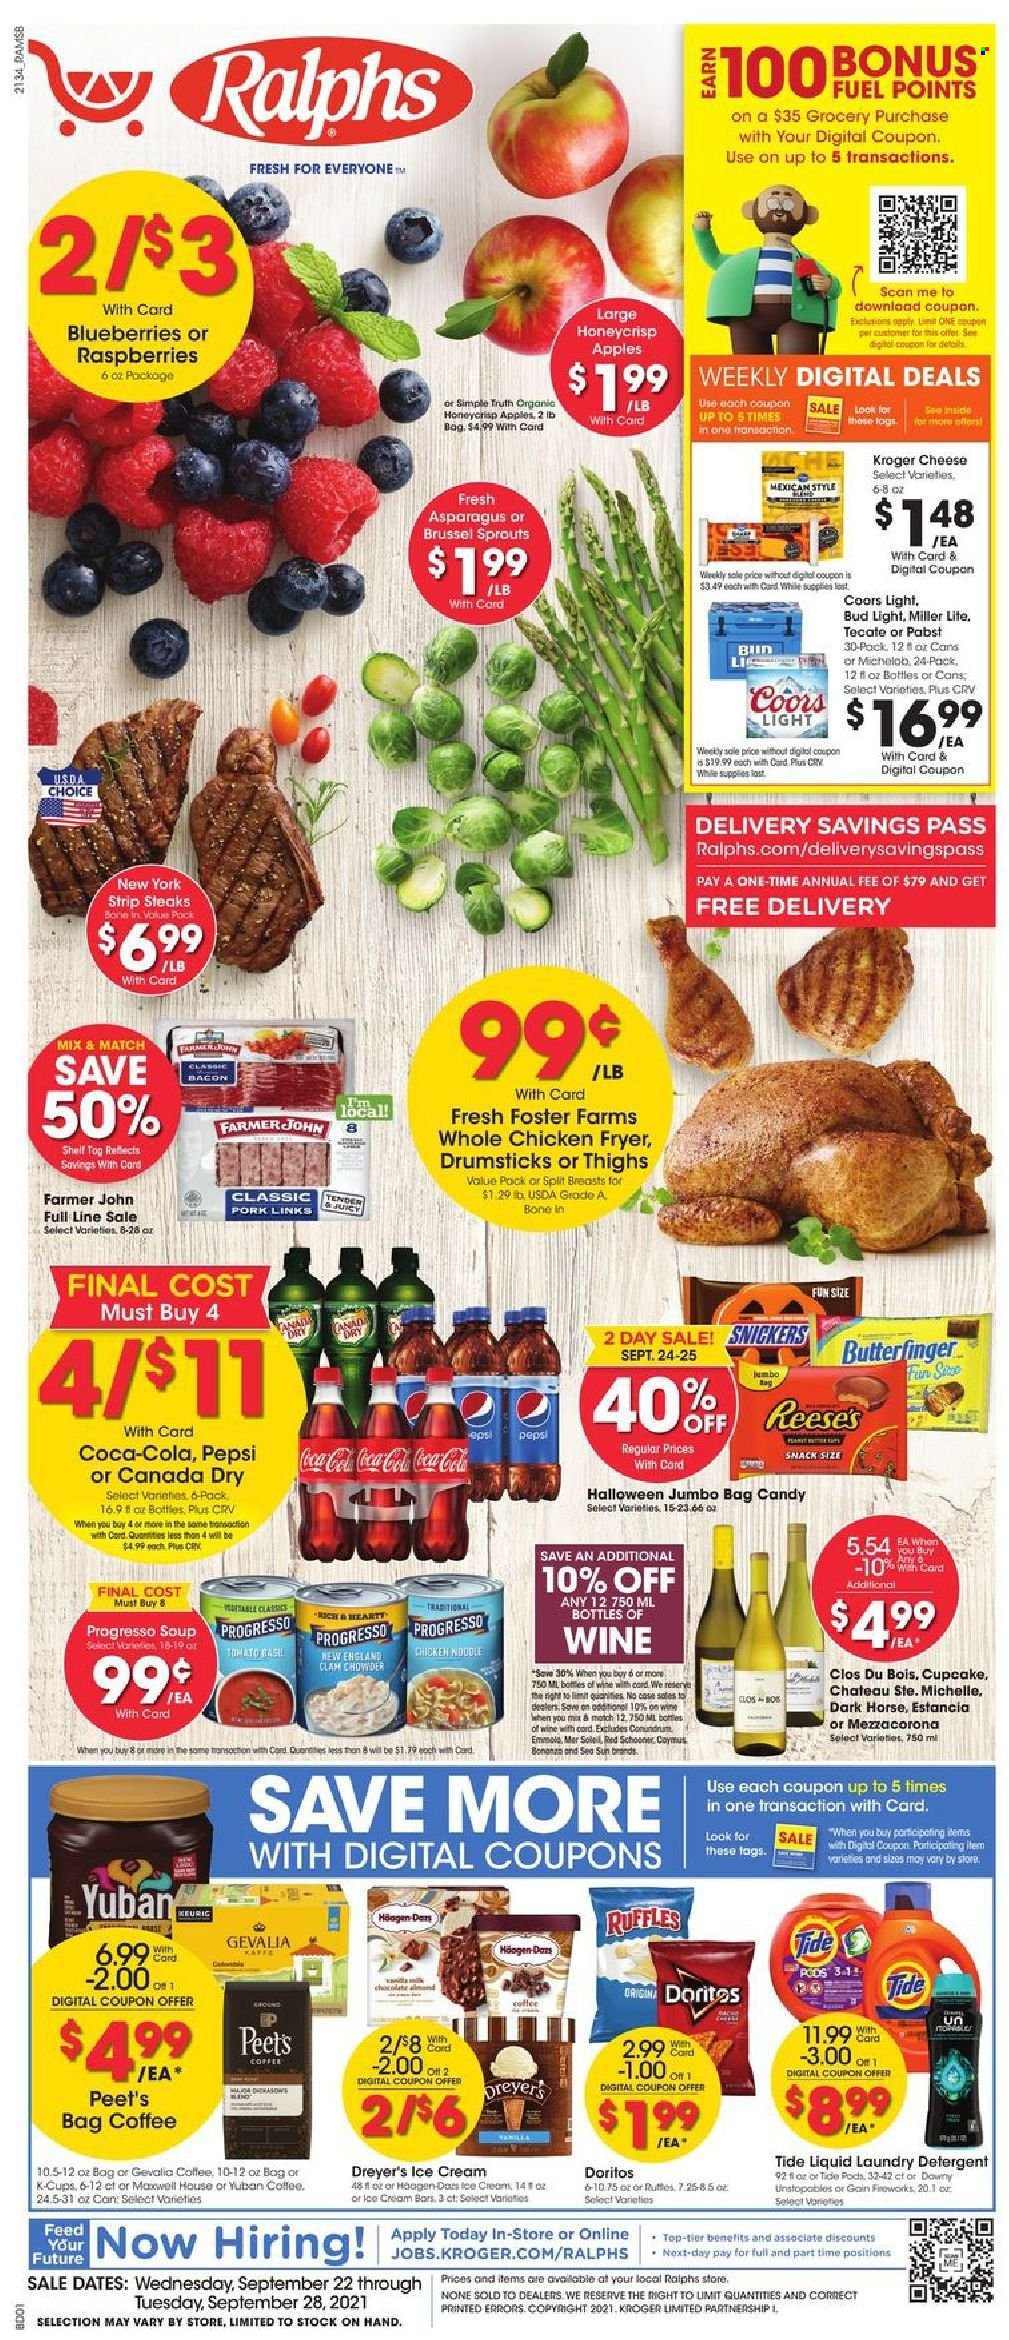 thumbnail - Ralphs Flyer - 09/22/2021 - 09/28/2021 - Sales products - cupcake, asparagus, brussel sprouts, apples, blueberries, noodles, Progresso, bacon, cheese, curd, ice cream, Reese's, Häagen-Dazs, snack, Snickers, Doritos, Ruffles, clam chowder, esponja, Canada Dry, Coca-Cola, Pepsi, coffee, coffee capsules, K-Cups, Gevalia, wine, Estancia, beer, Bud Light, whole chicken, beef meat, steak, striploin steak, detergent, Tide, laundry detergent, Lee, Miller Lite, Coors, Michelob. Page 1.